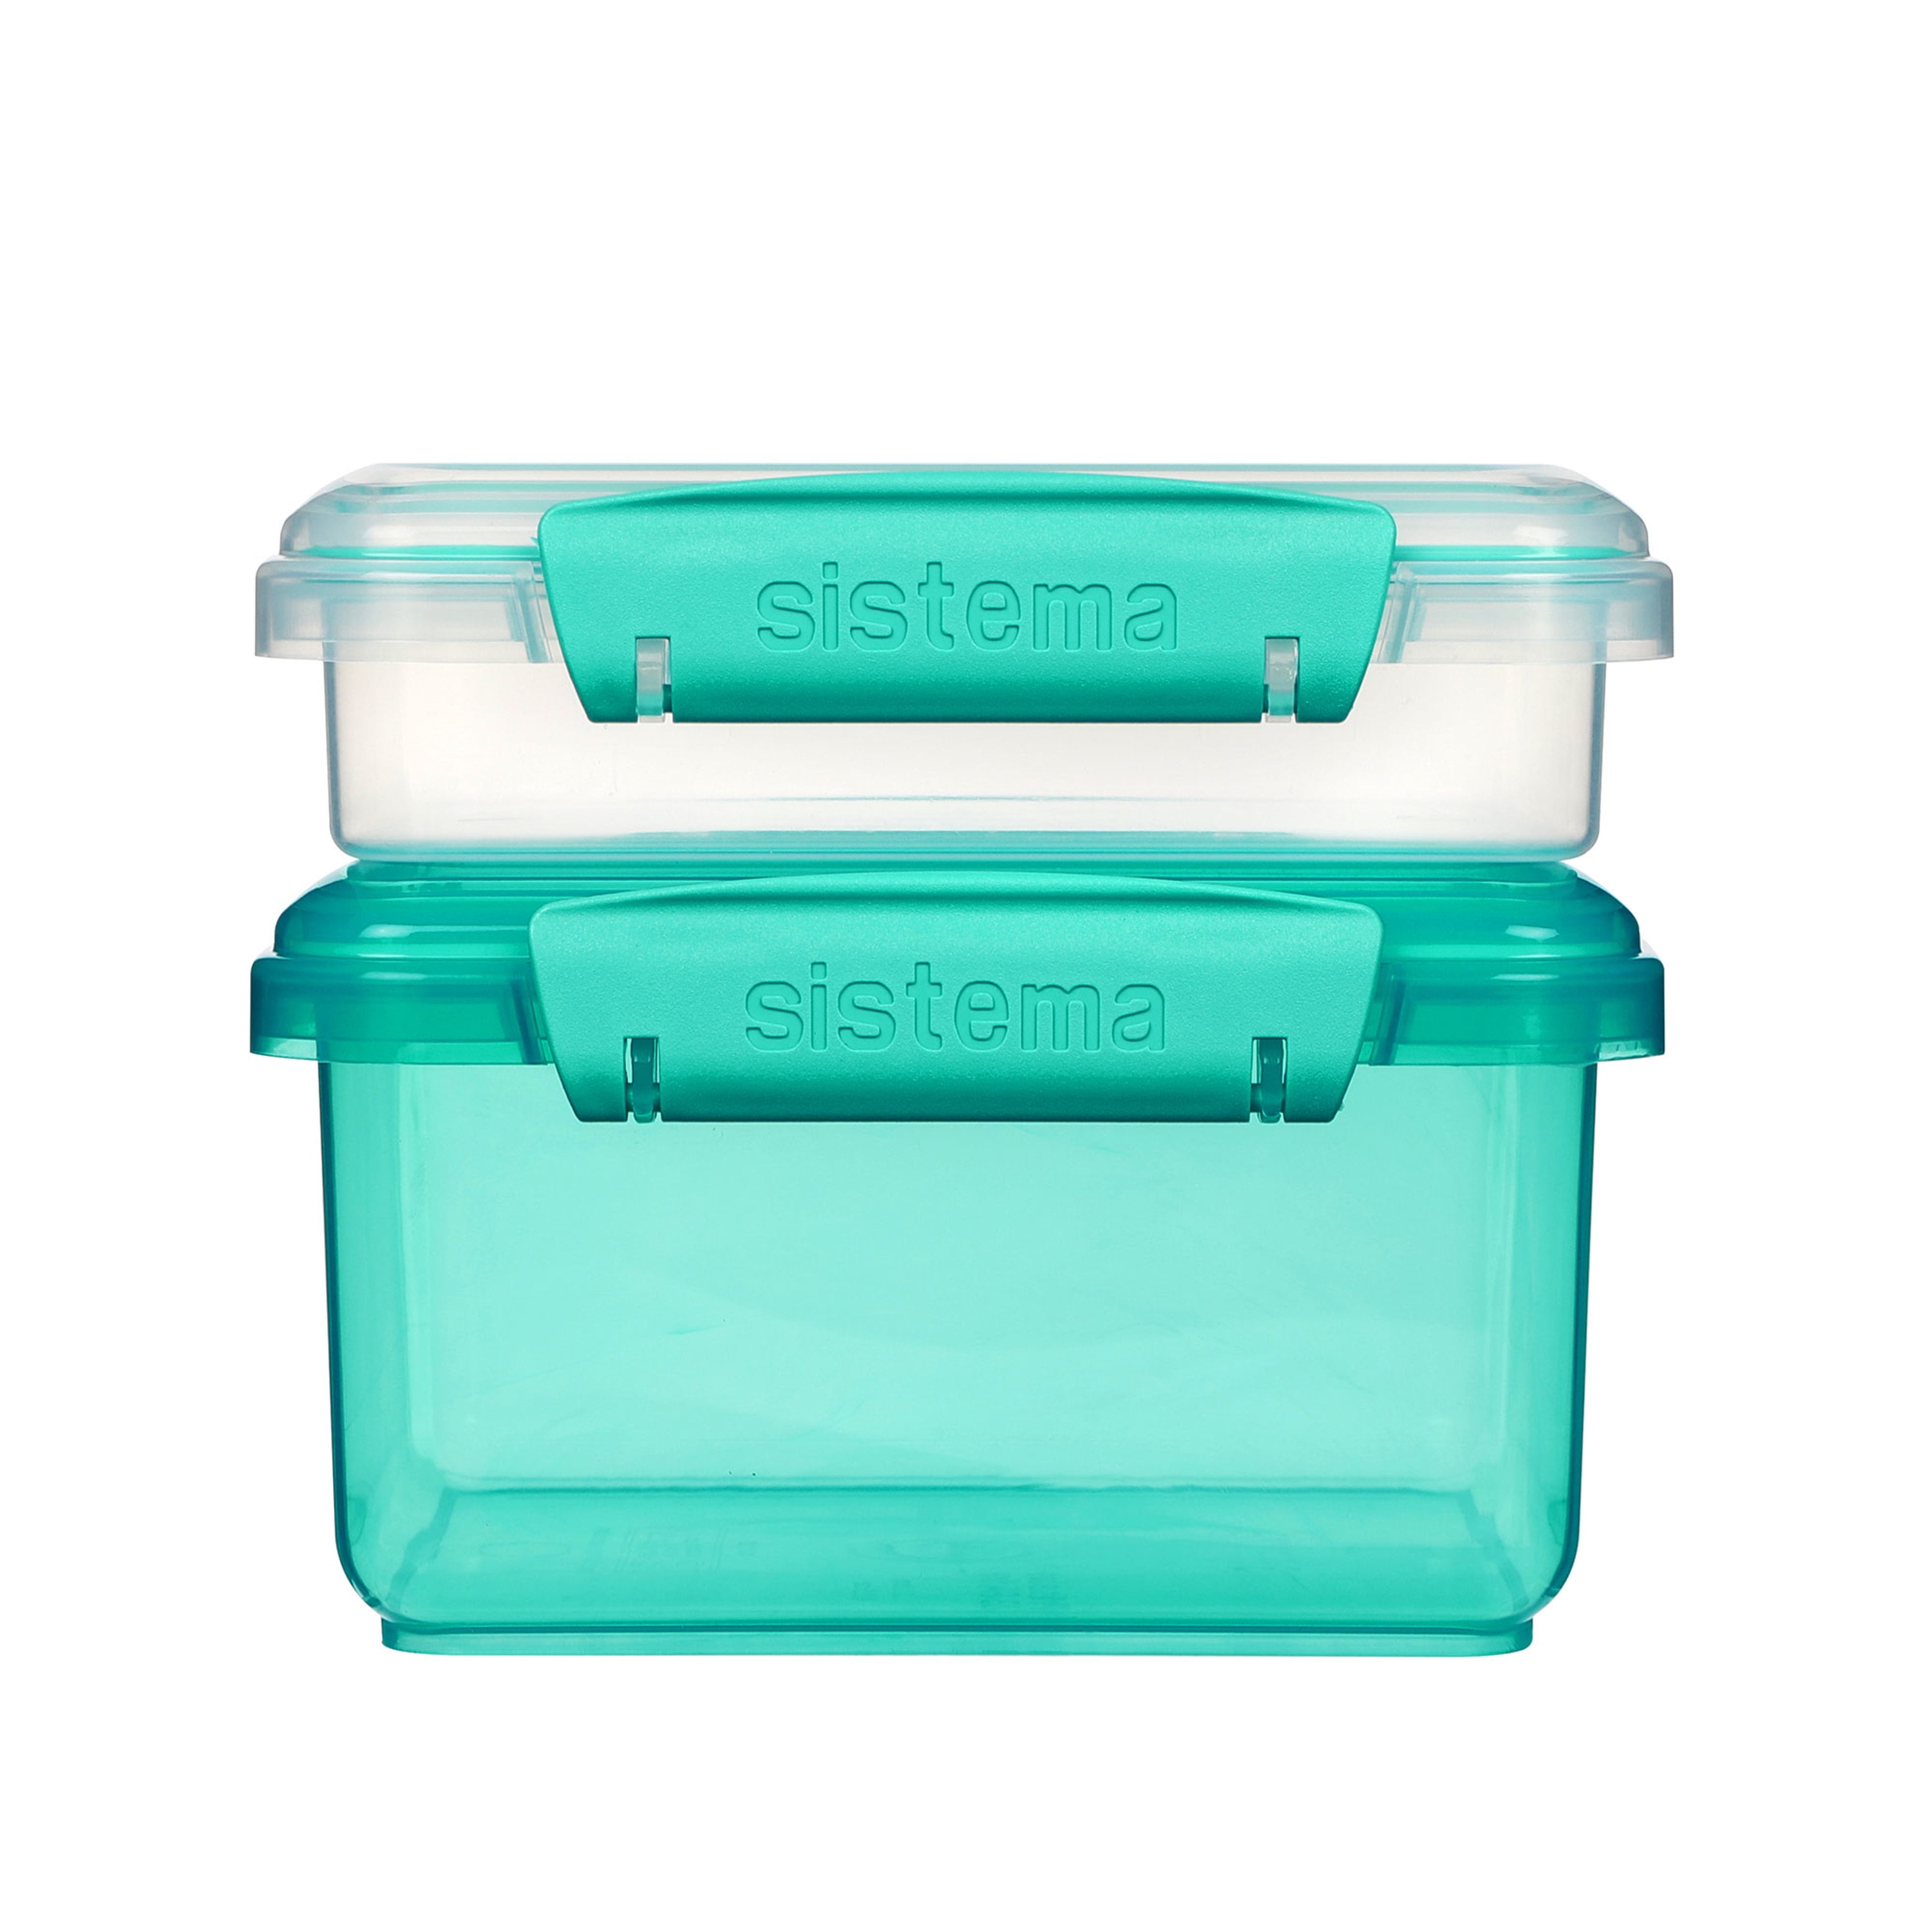 Sistema Microwavable Plastic Containers Will Save You From Pasta